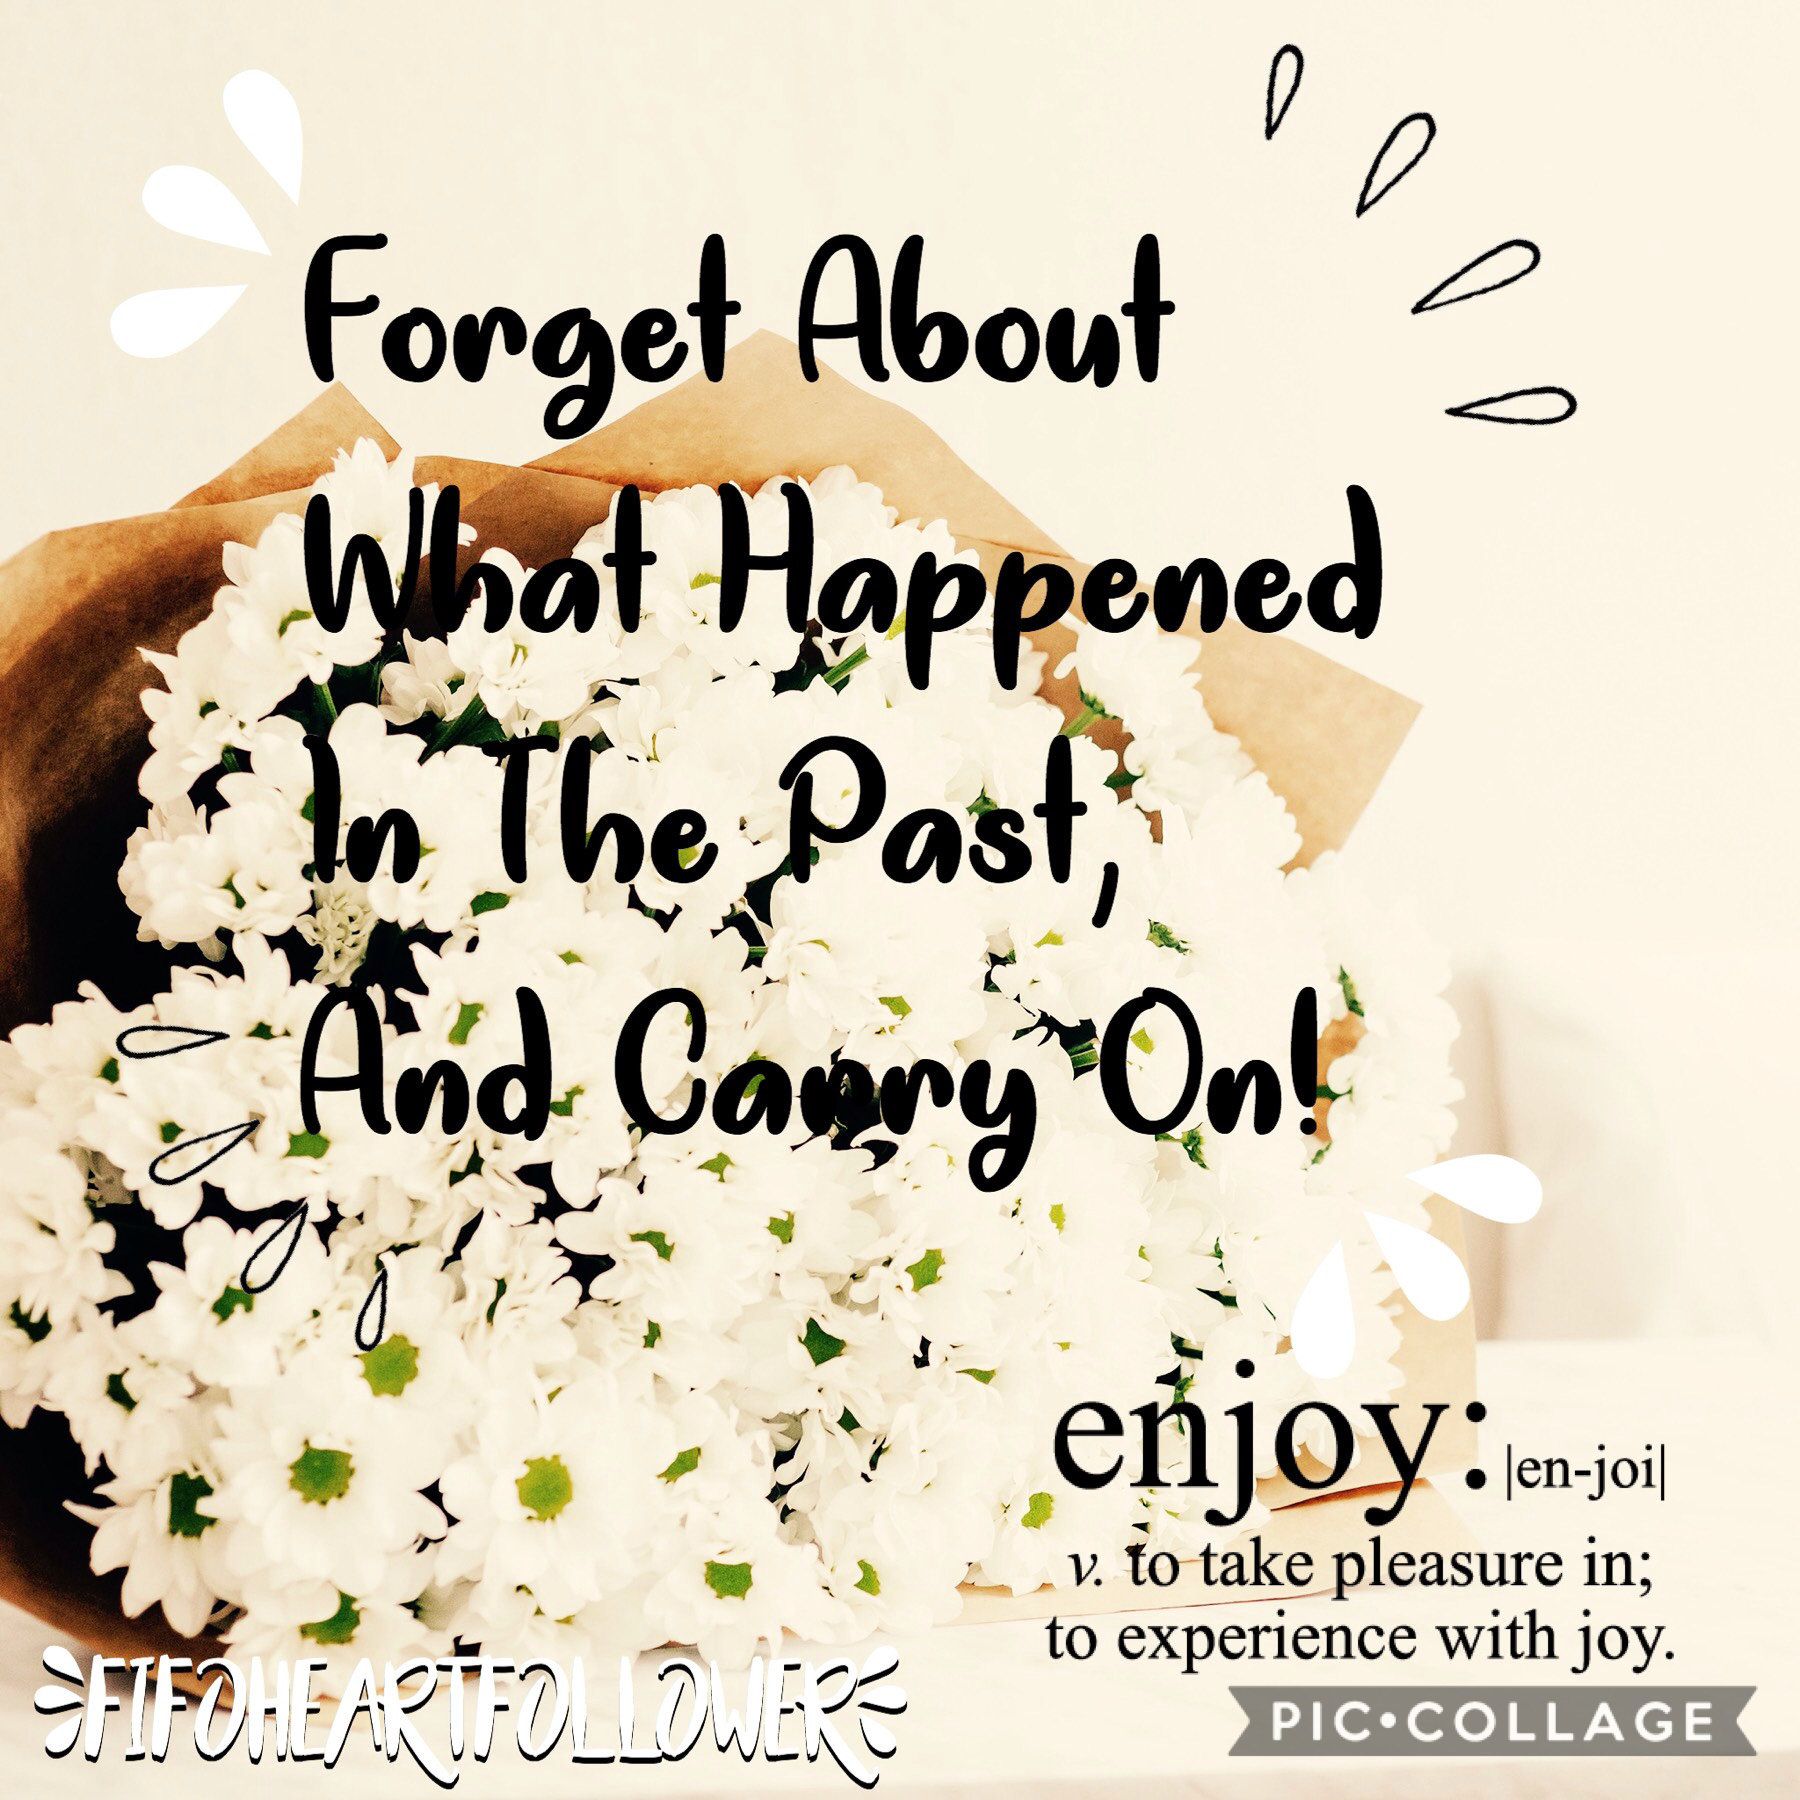                           Just forget about what happened in the past. It's time to start a new chapter in your life!